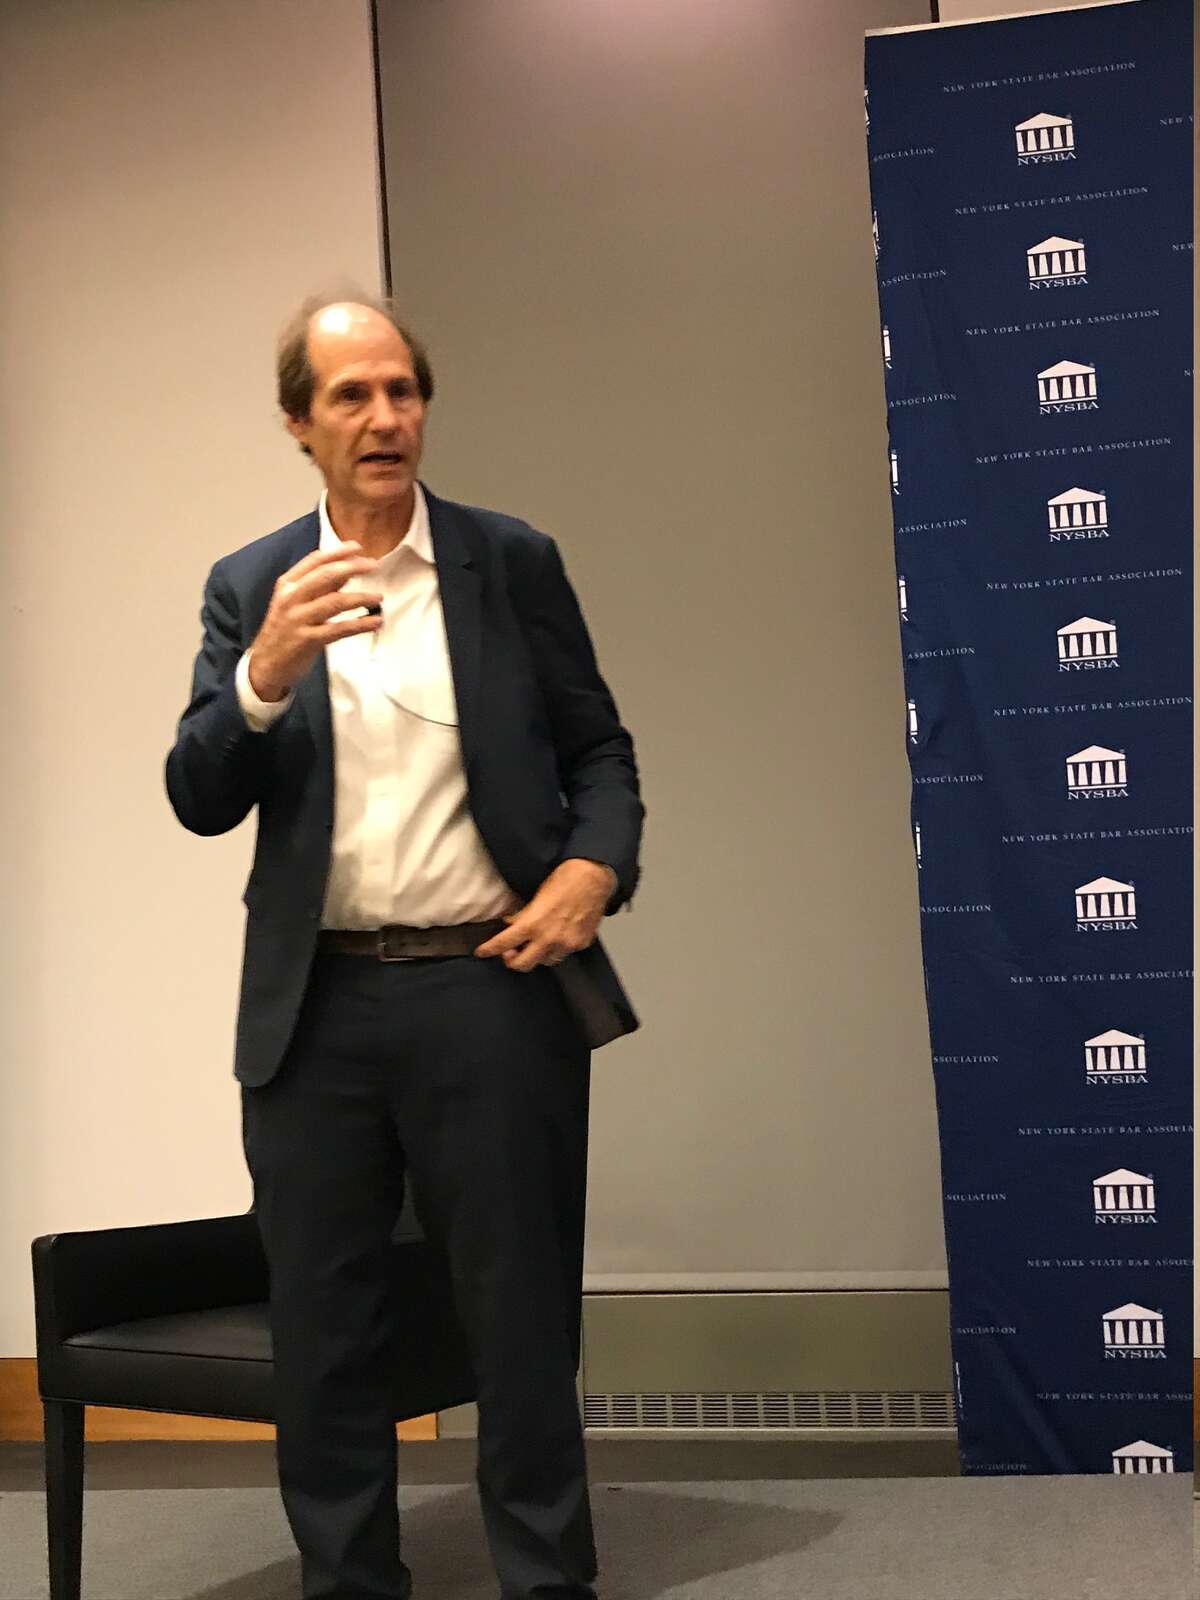 Legal scholar Cass Sunstein discusses what constitutions an impeachable offence at a talk on Oct. 15 at Fordham Law School in New York City